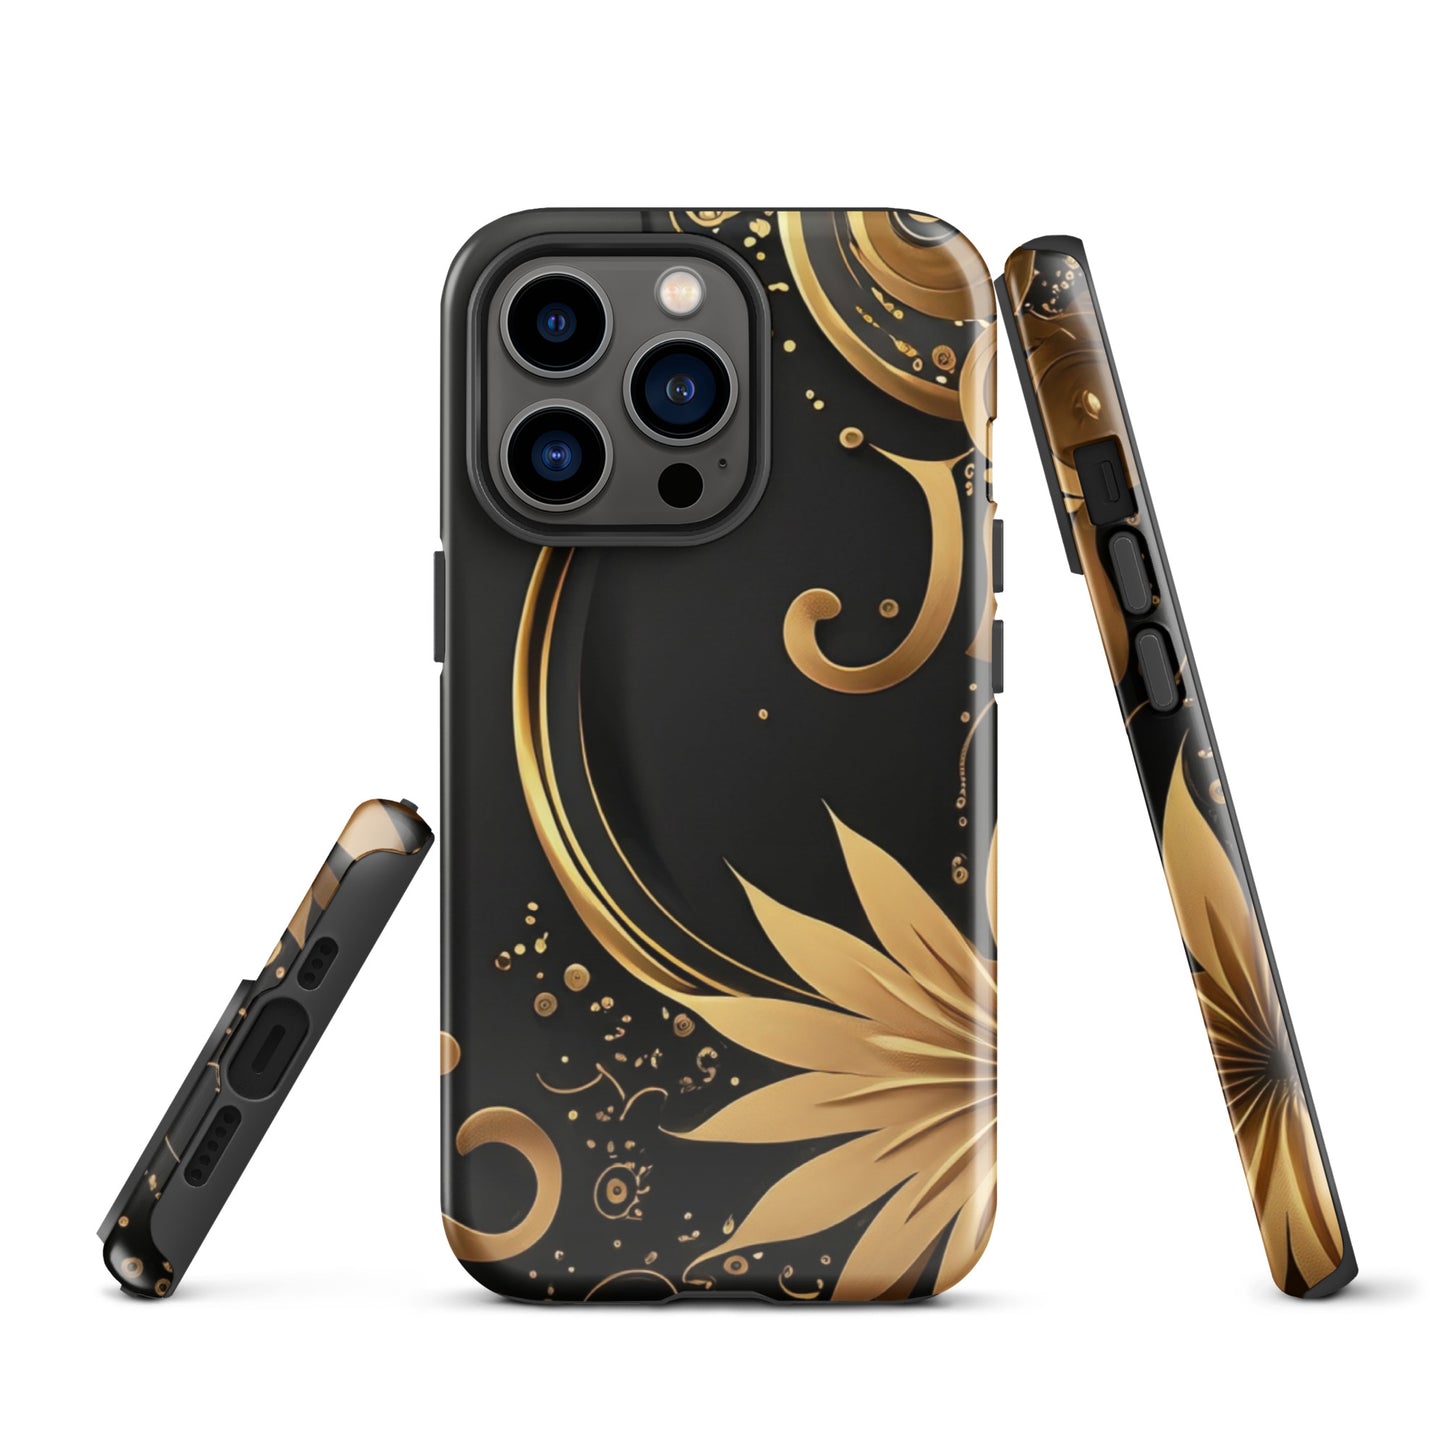 A Golden Flower Case for the iPhone 13 Pro